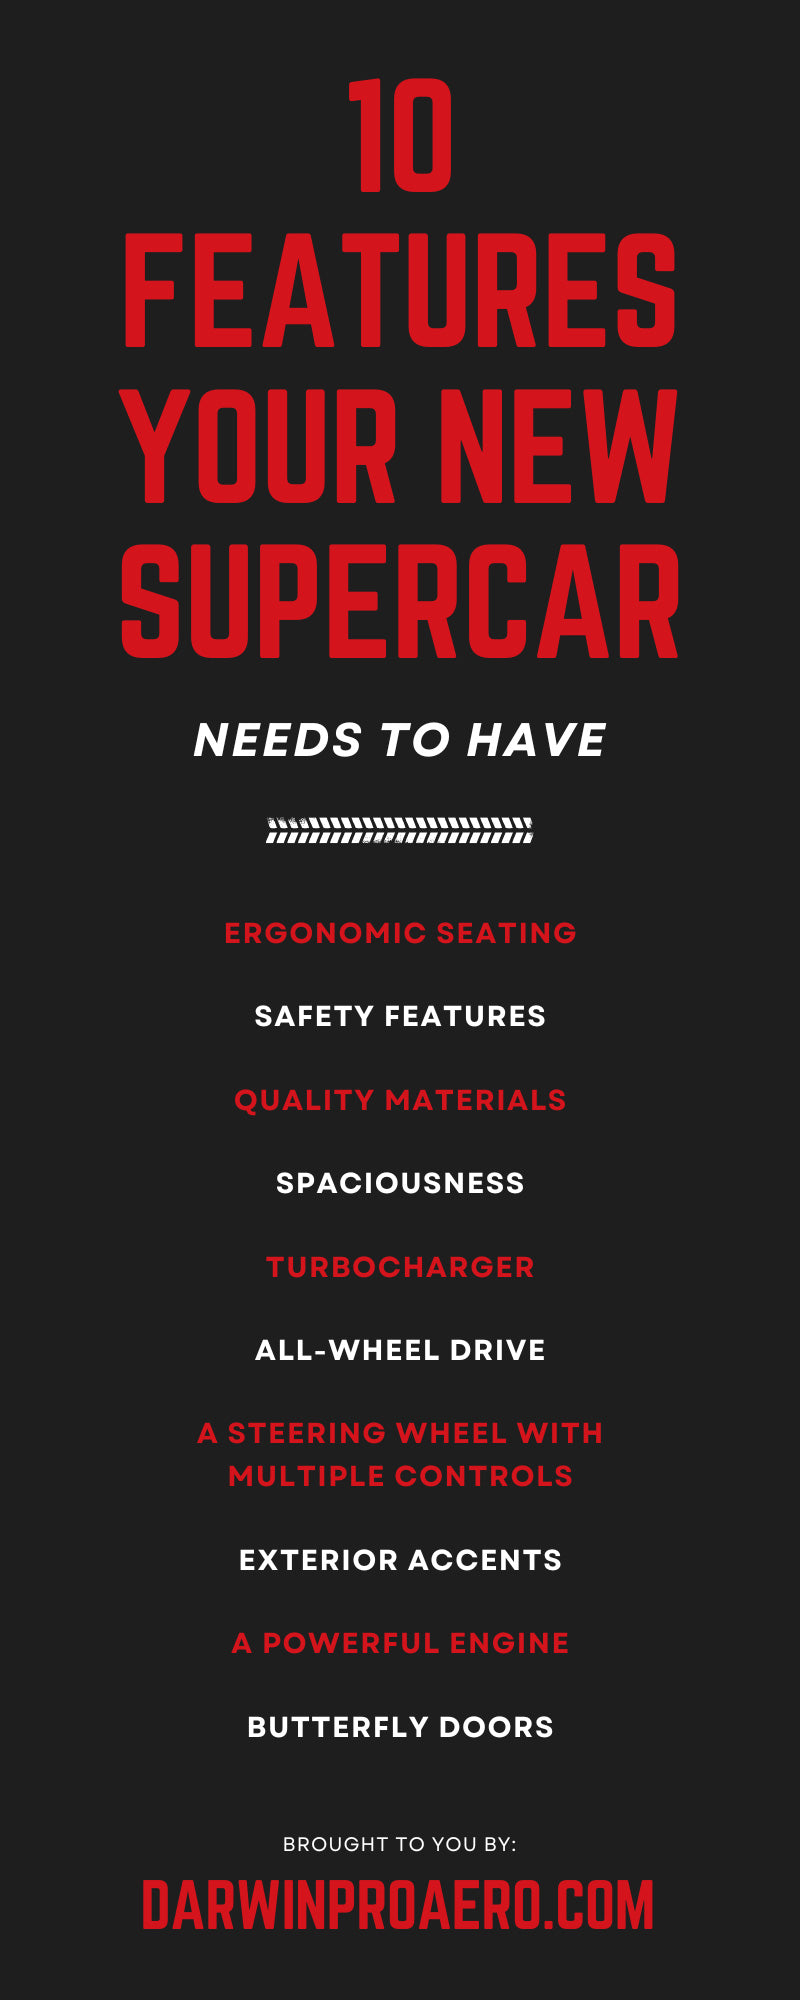 10 Features Your New Supercar Needs to Have